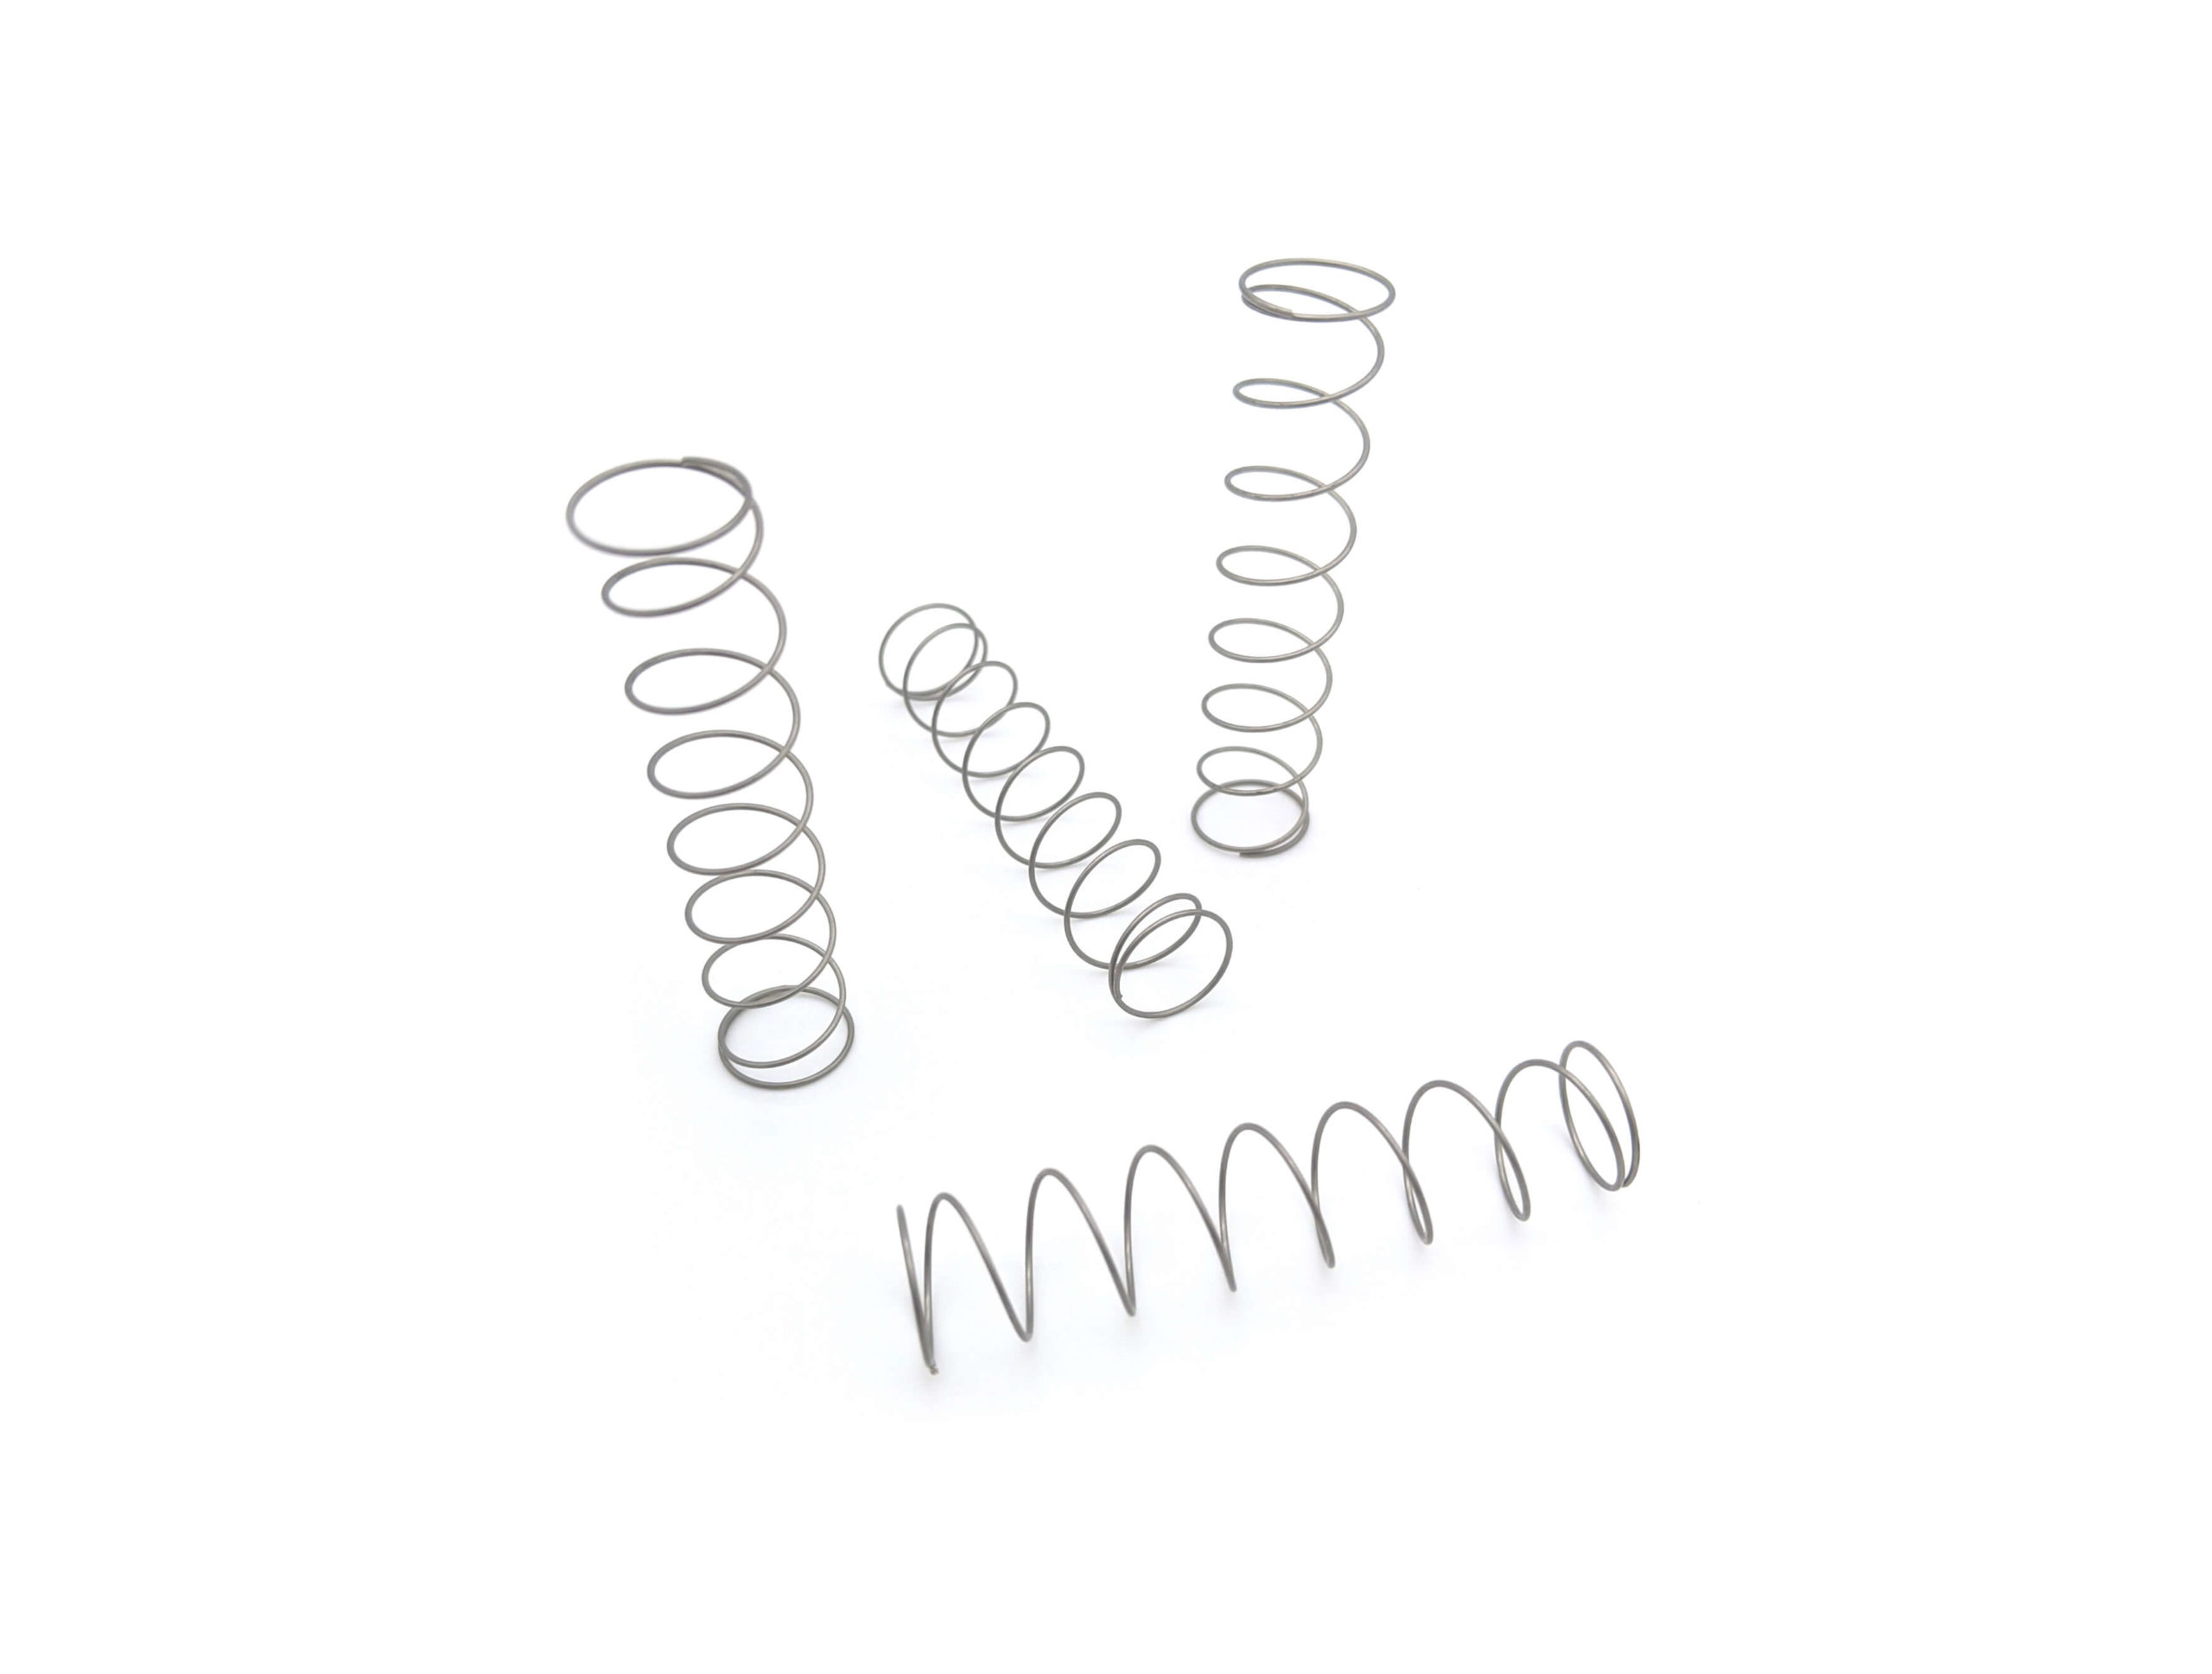 CENG stainless steel compression spring